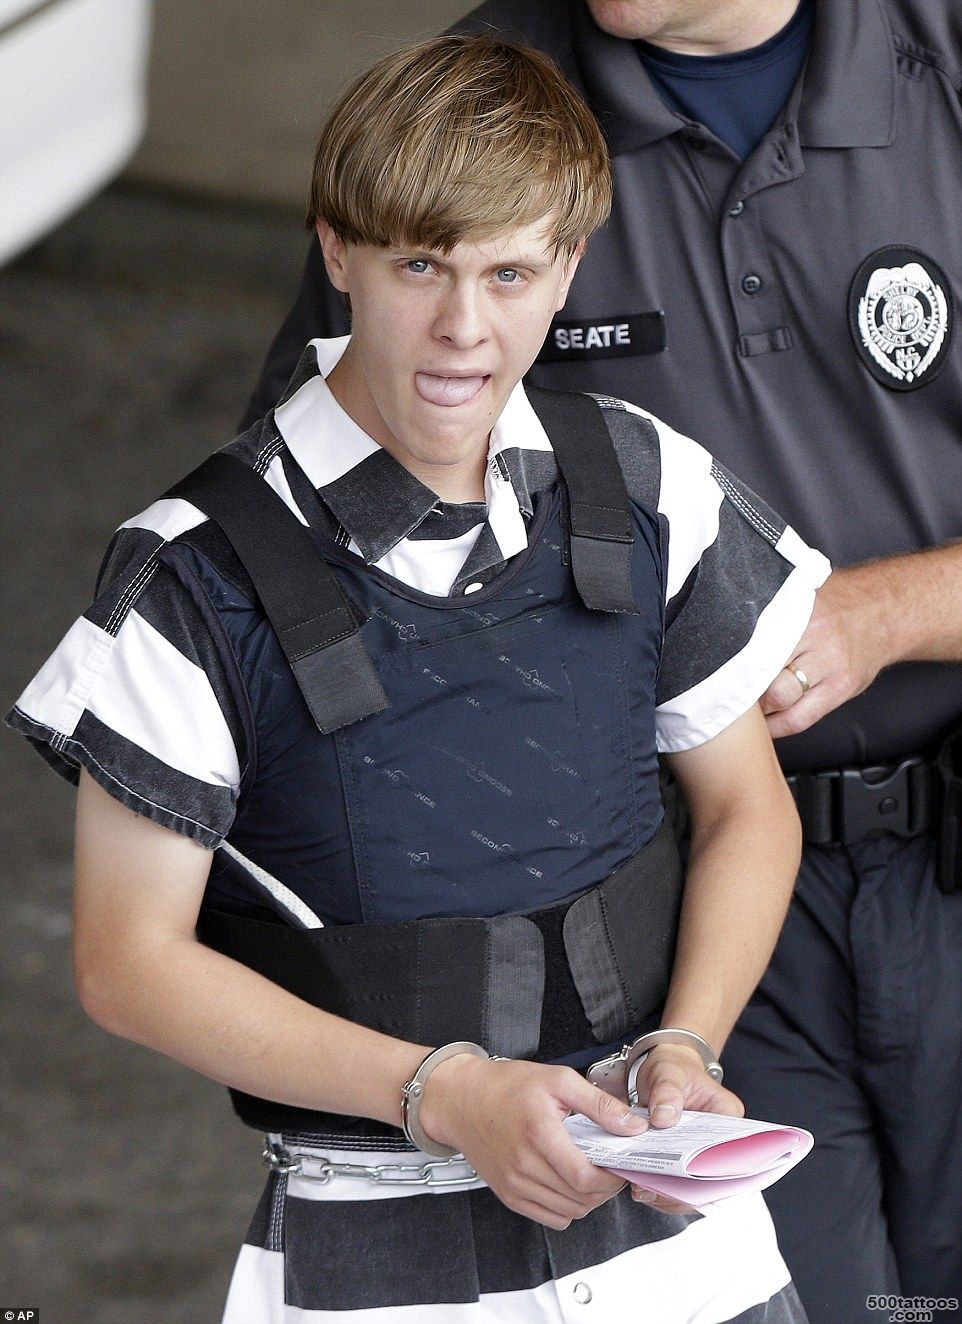 Dylan Roof#39s missing racist tattoo now gone white power symbol ..._44